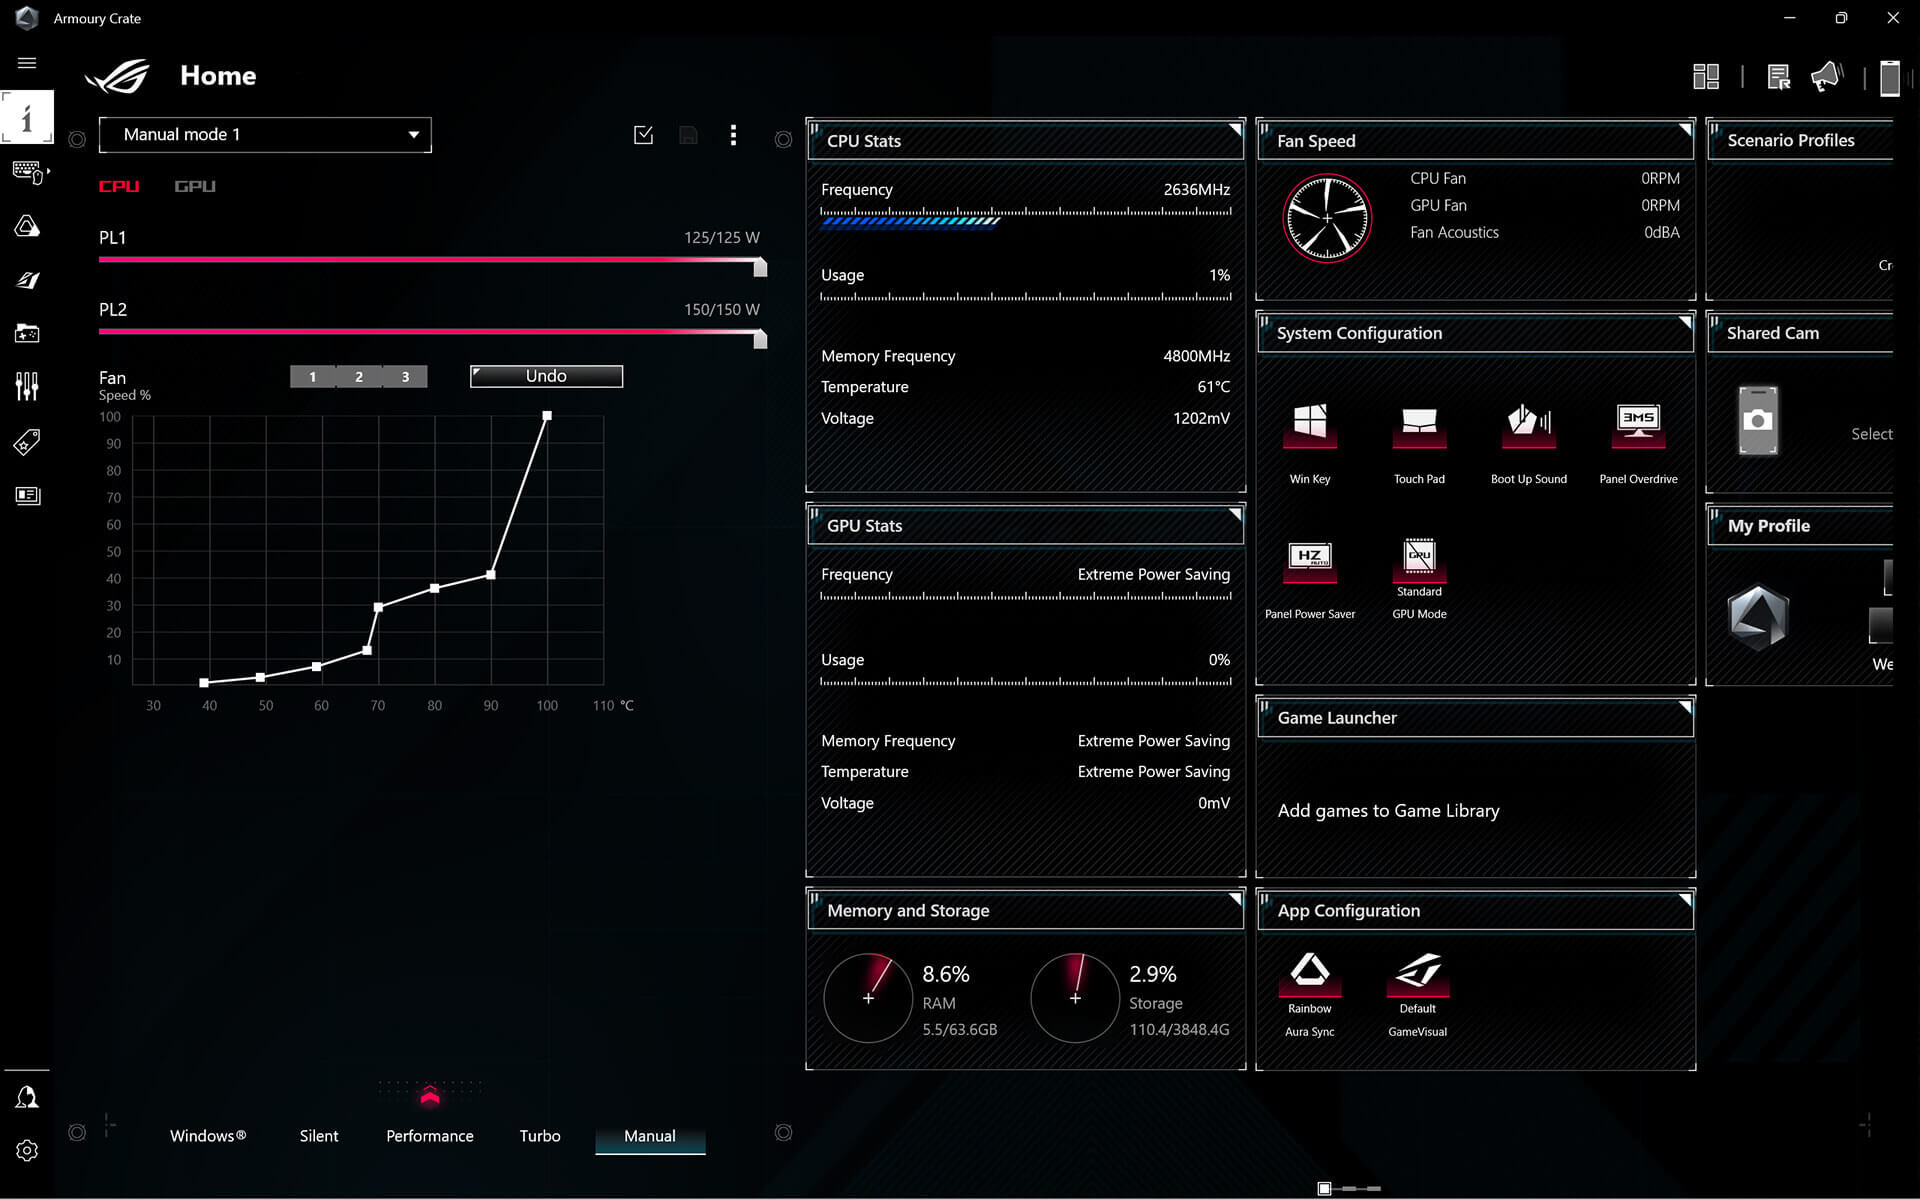 The interface showing where users can adjust the system manually.